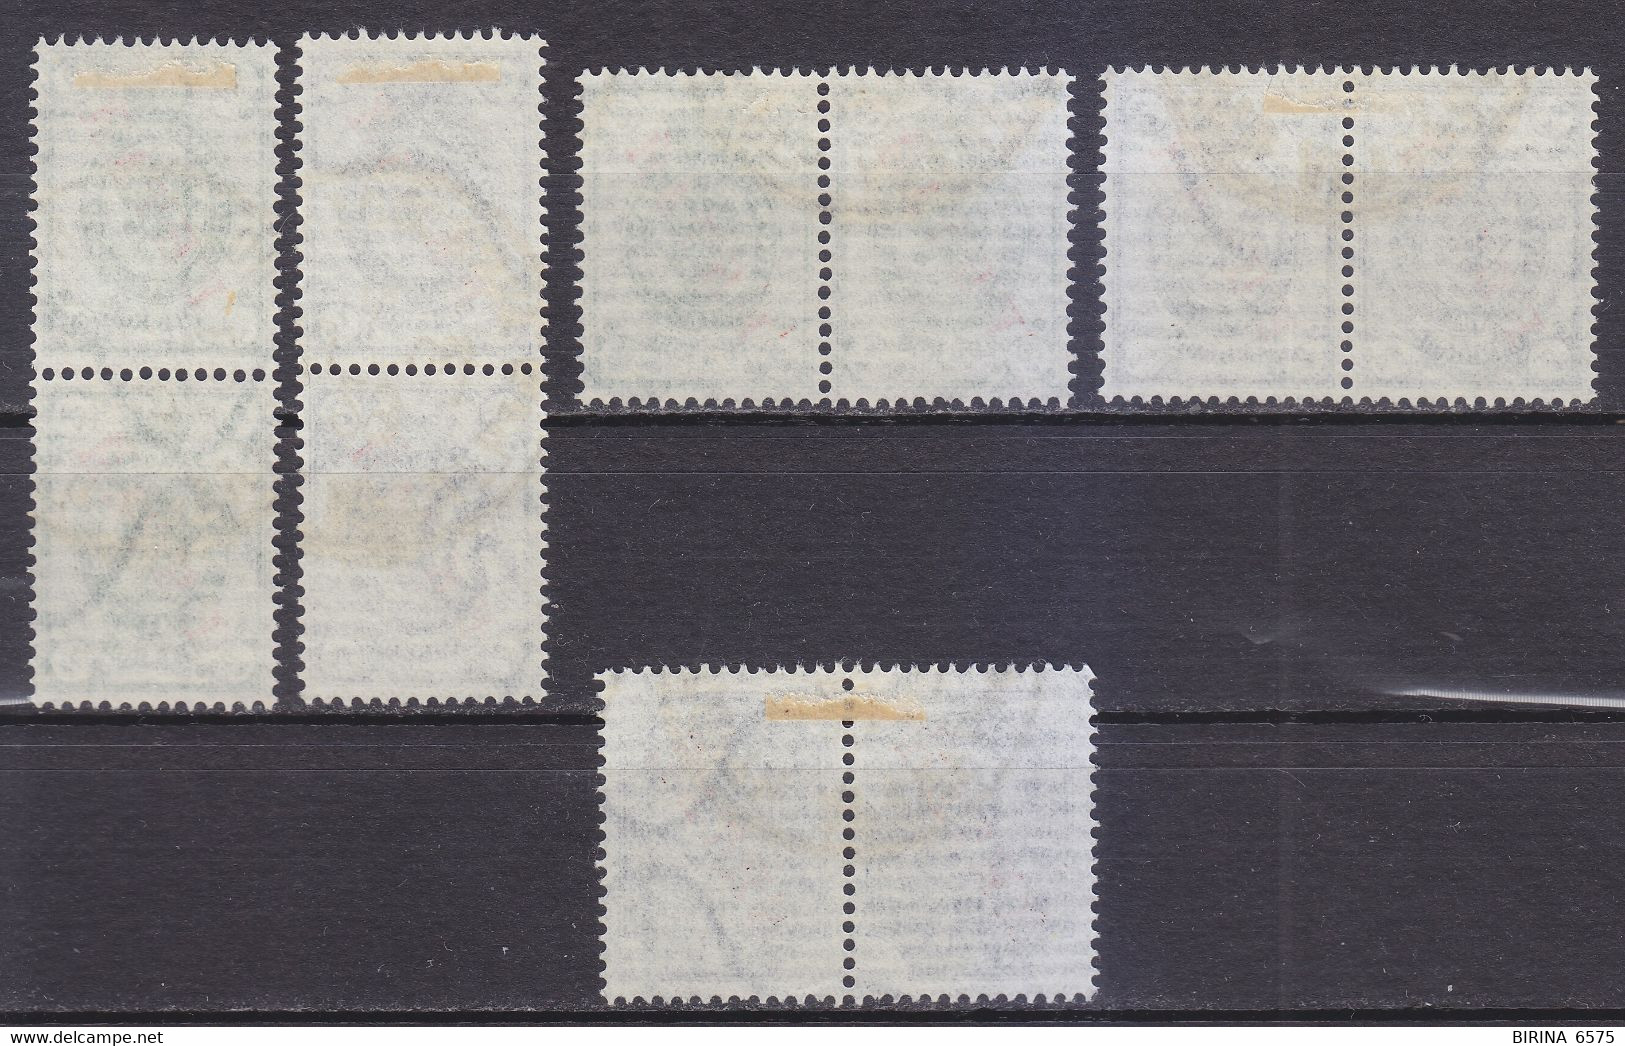 Russian PO In China. 1900 "Port Arthur" Cancellation. 5 Pairs - M - Chine